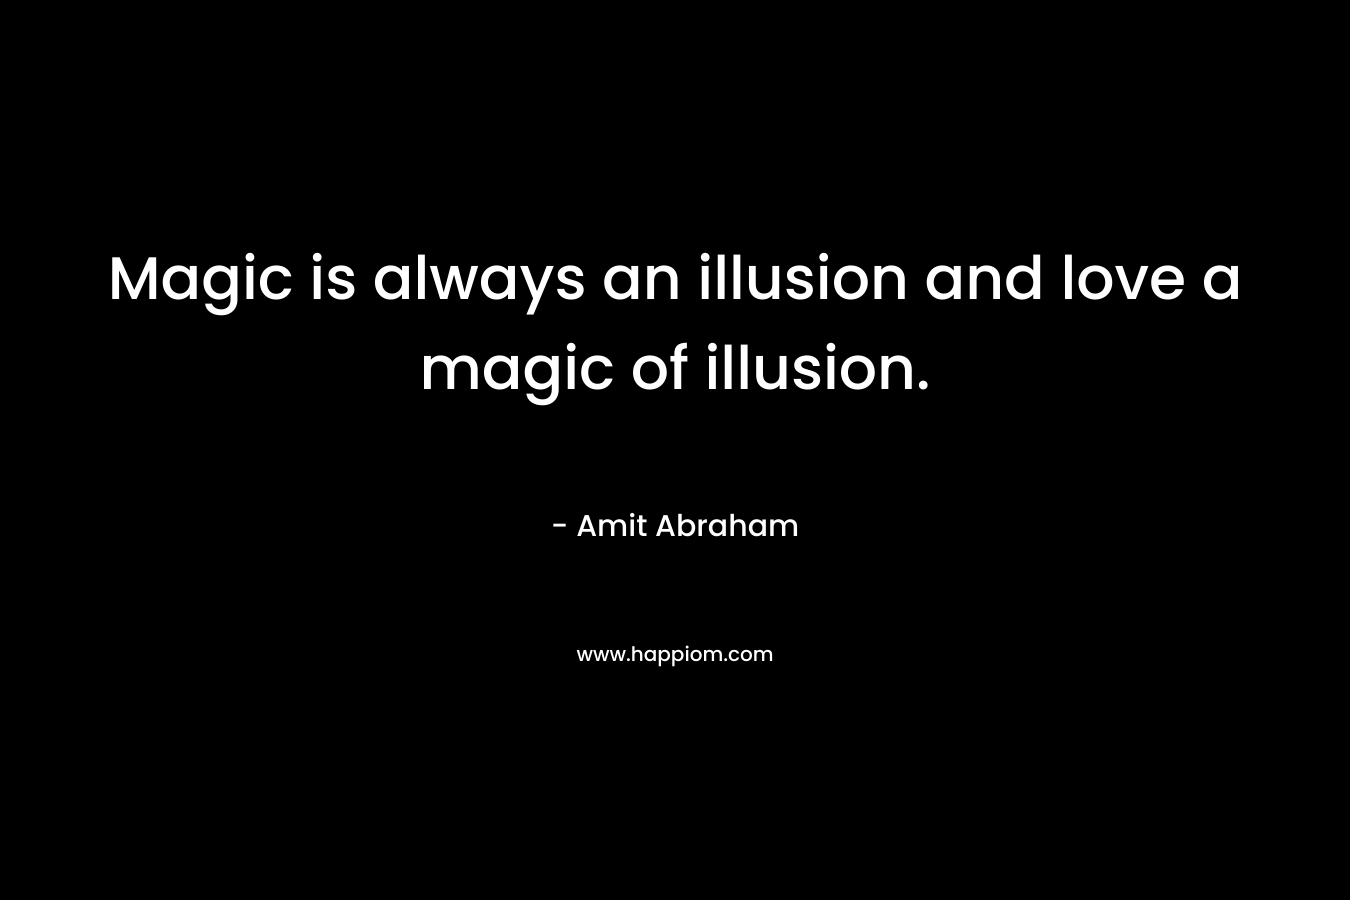 Magic is always an illusion and love a magic of illusion.